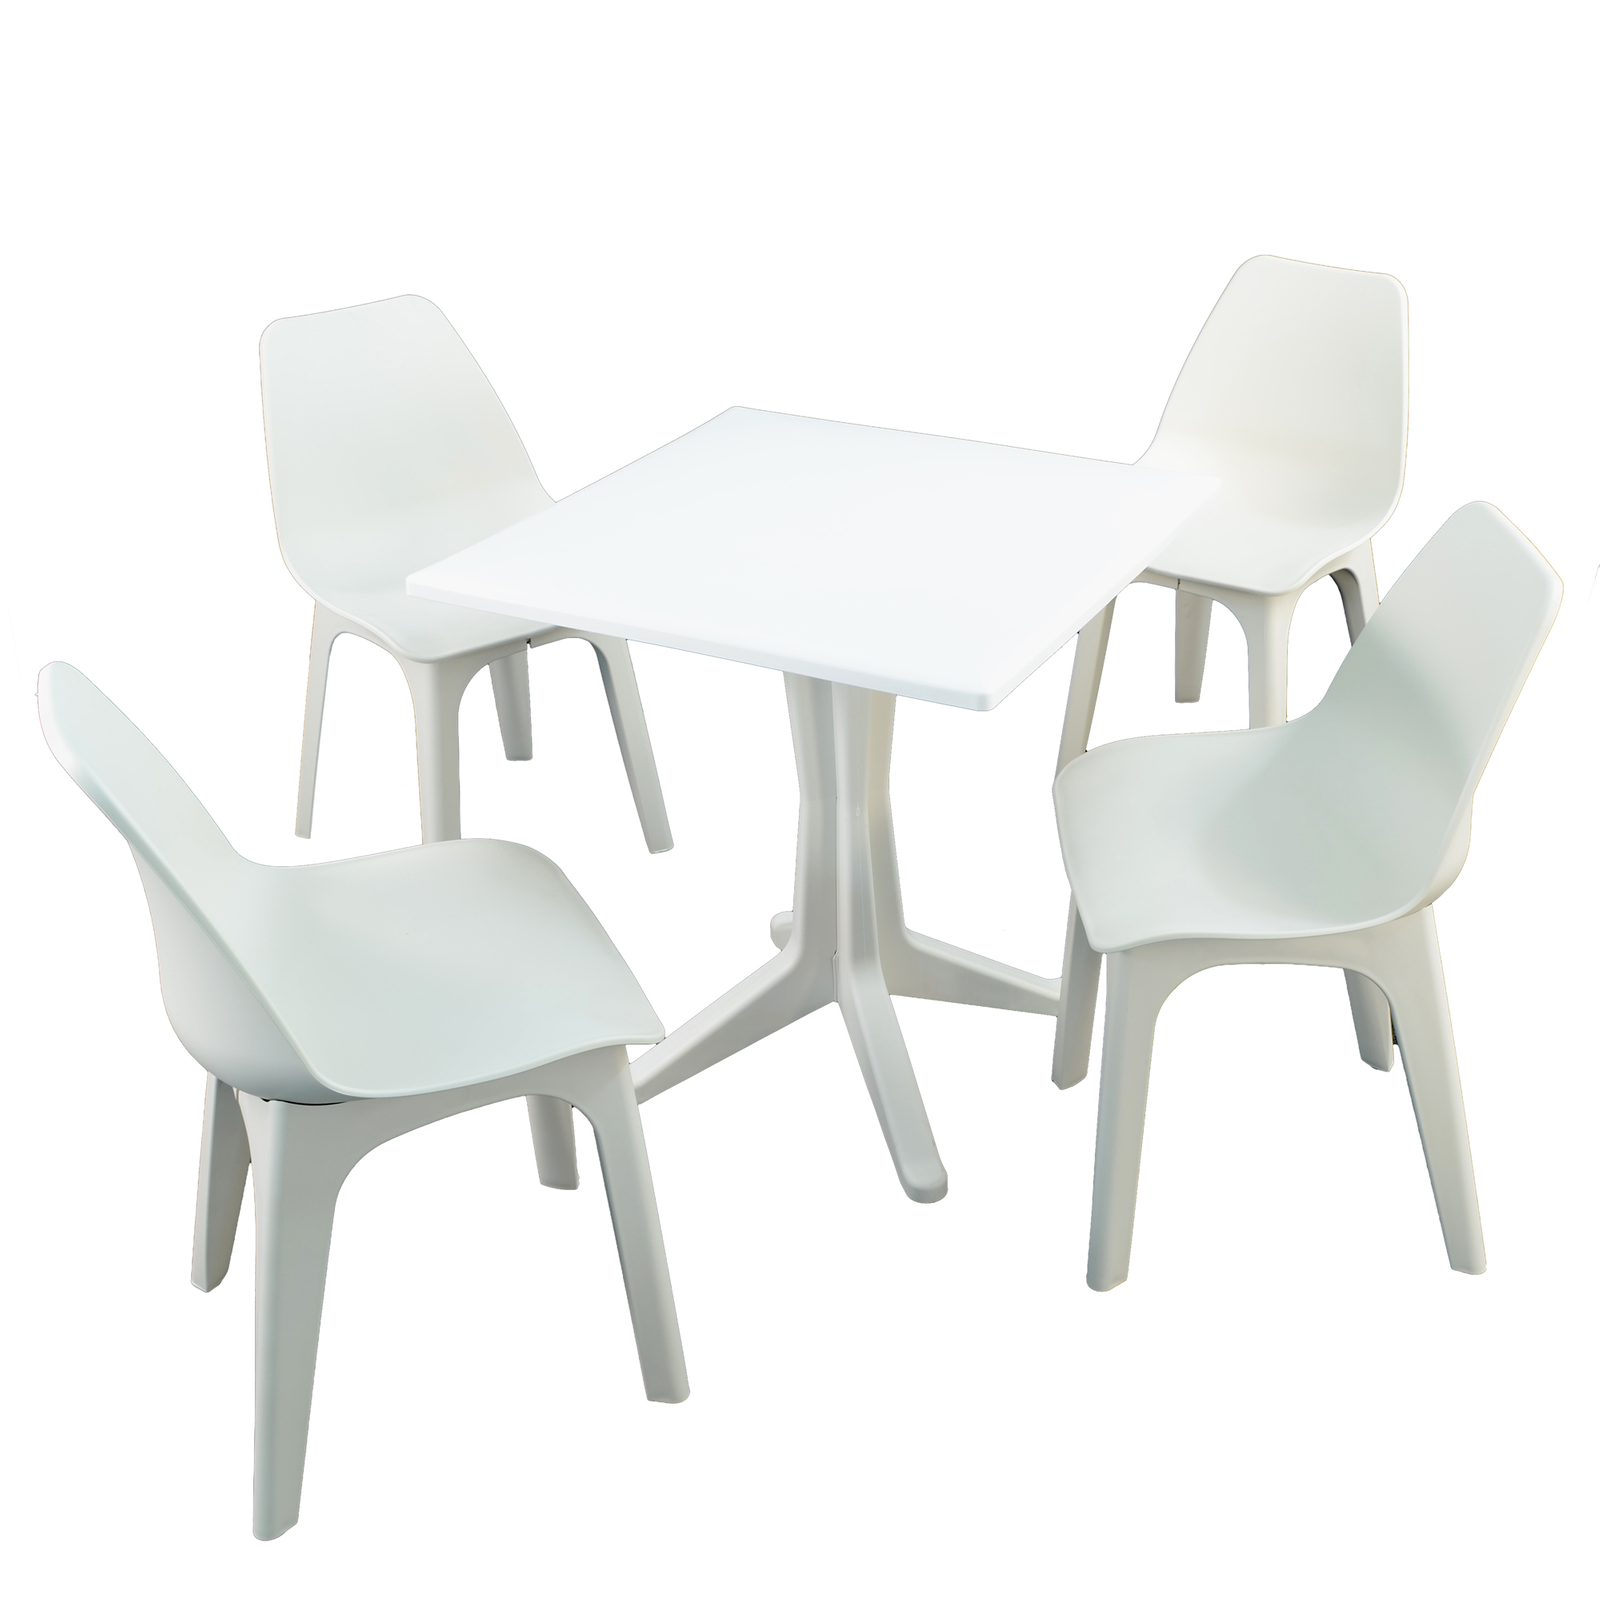 Trabella White Ponente Dining Table with 4 Eolo Chairs Dining Sets Trabella Default Title  